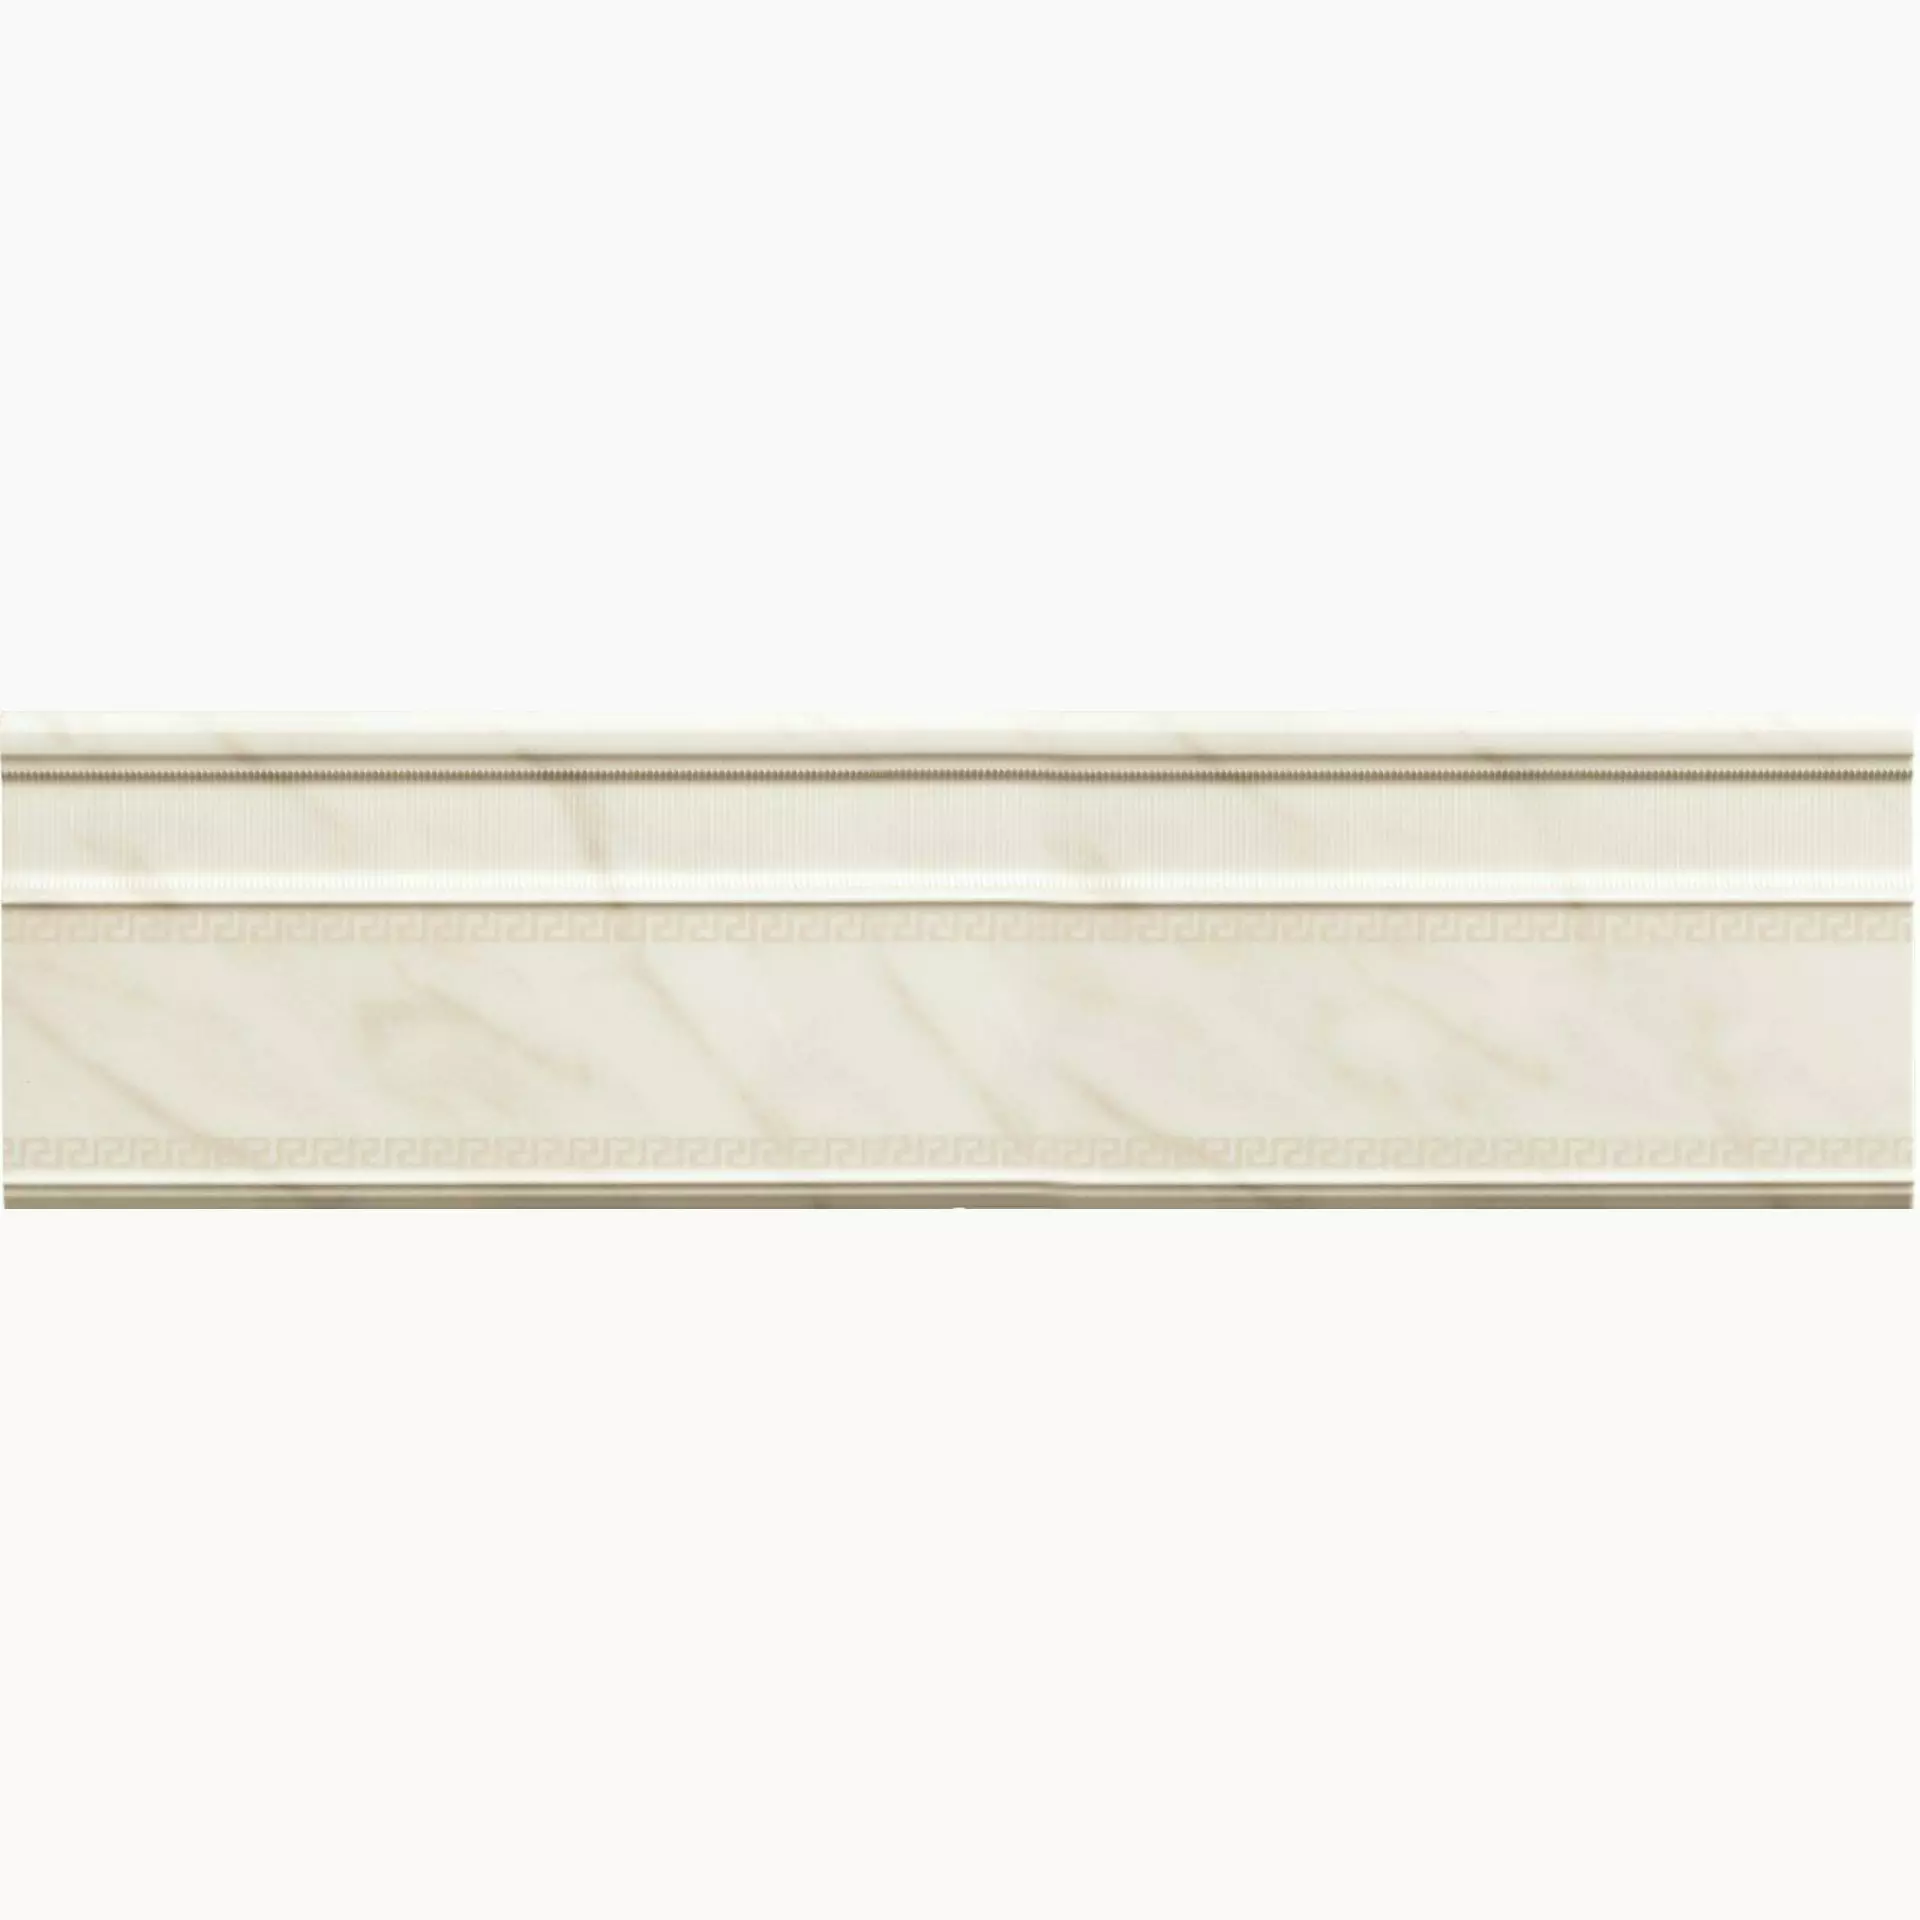 Versace Marble Bianco Naturale Skirting board G0240791 15x58,5cm rectified